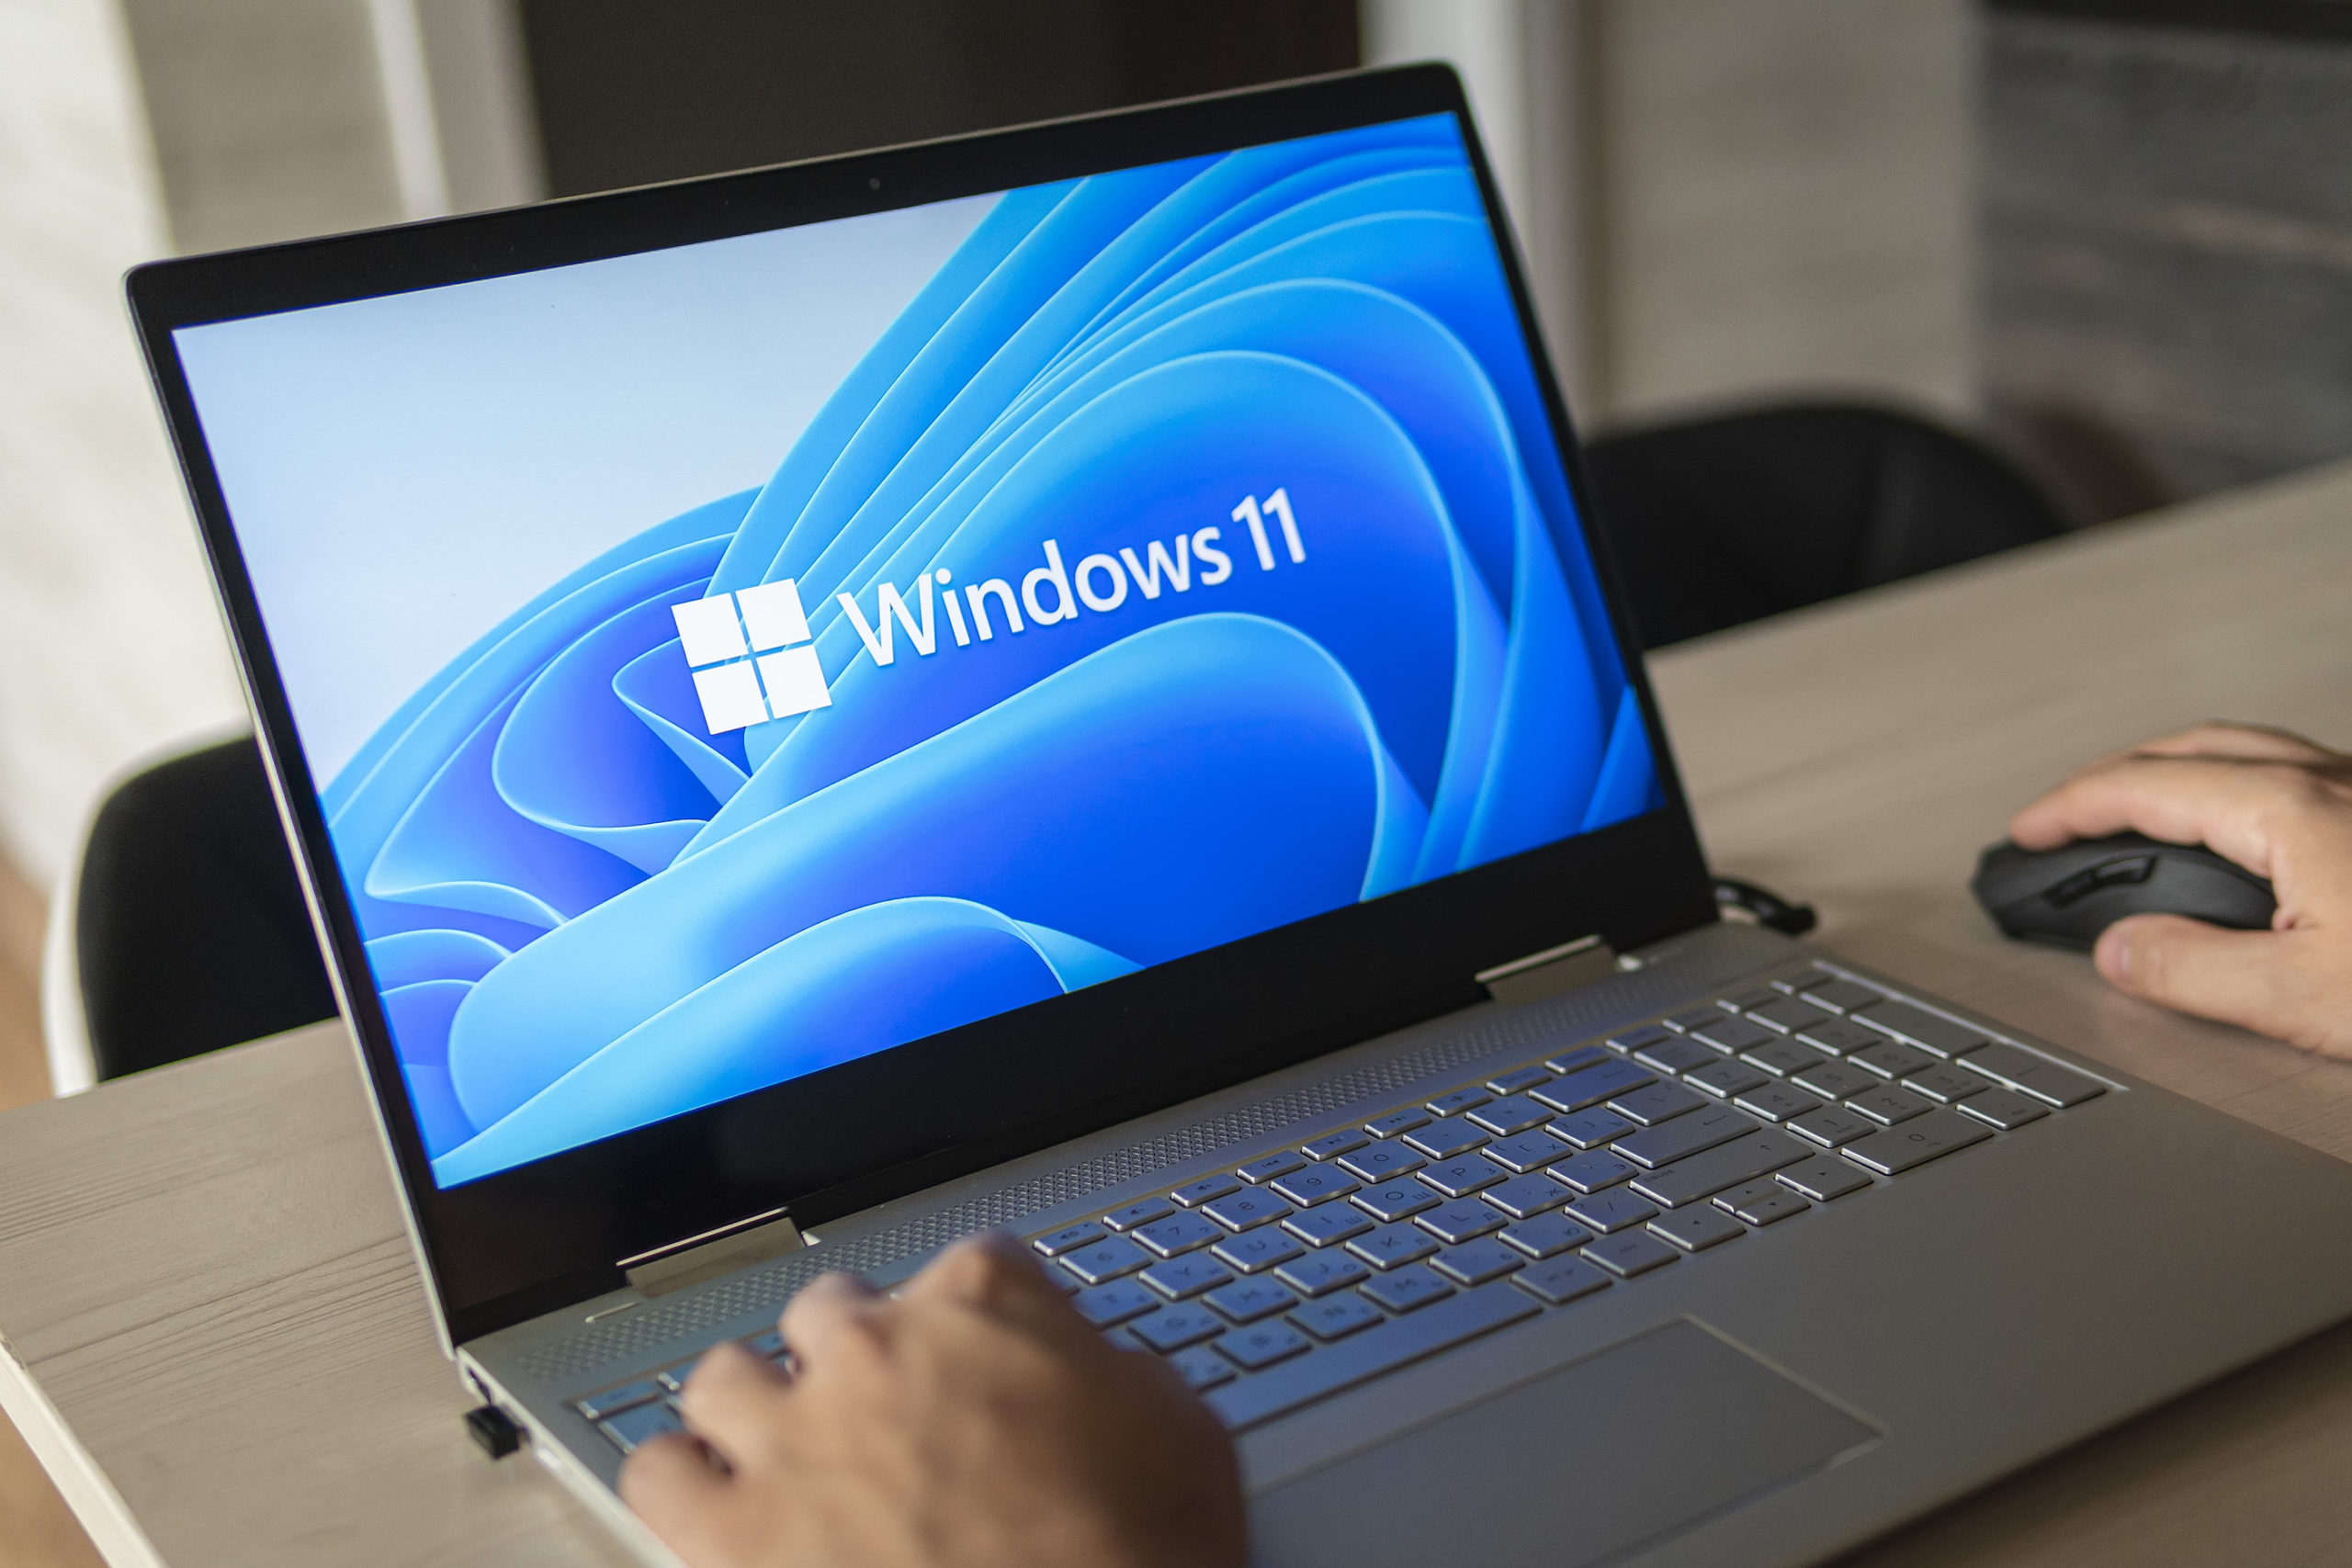 Windows 11 So Far Reviews, Issues, Reasons to Wait, Benefits